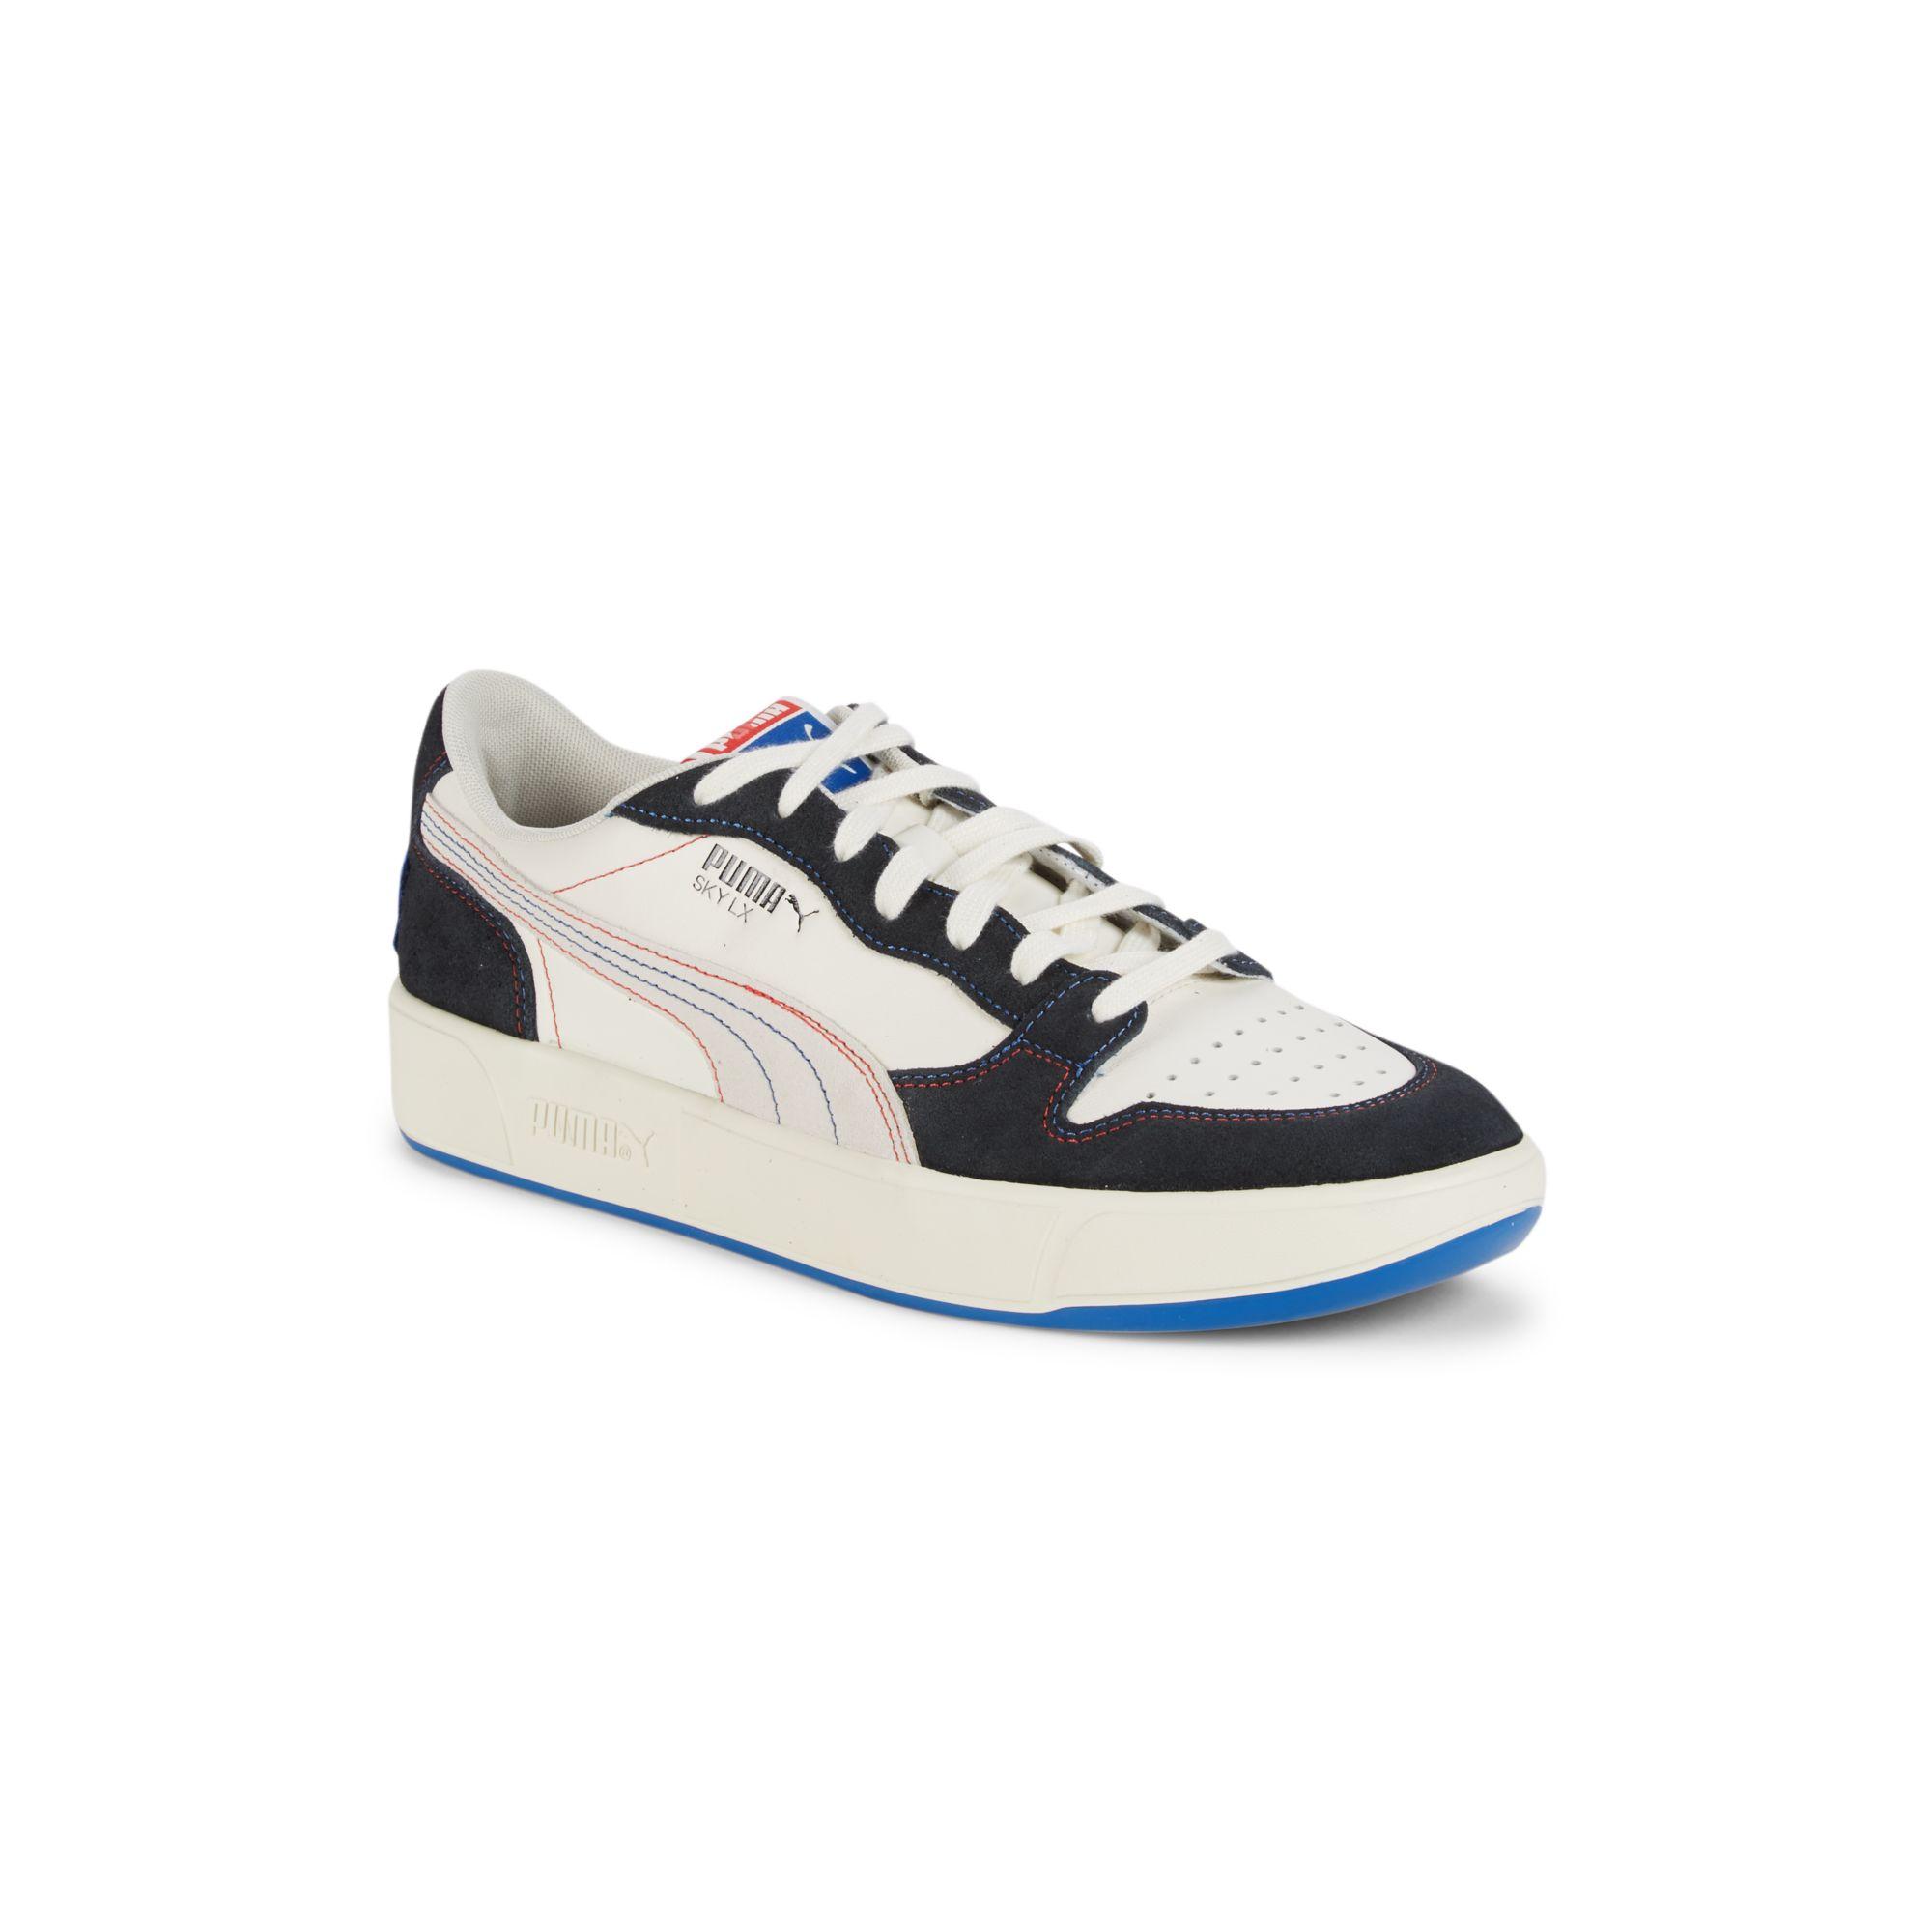 PUMA Leather Sky Lx Low Japanorama Sneakers in White for Men - Lyst